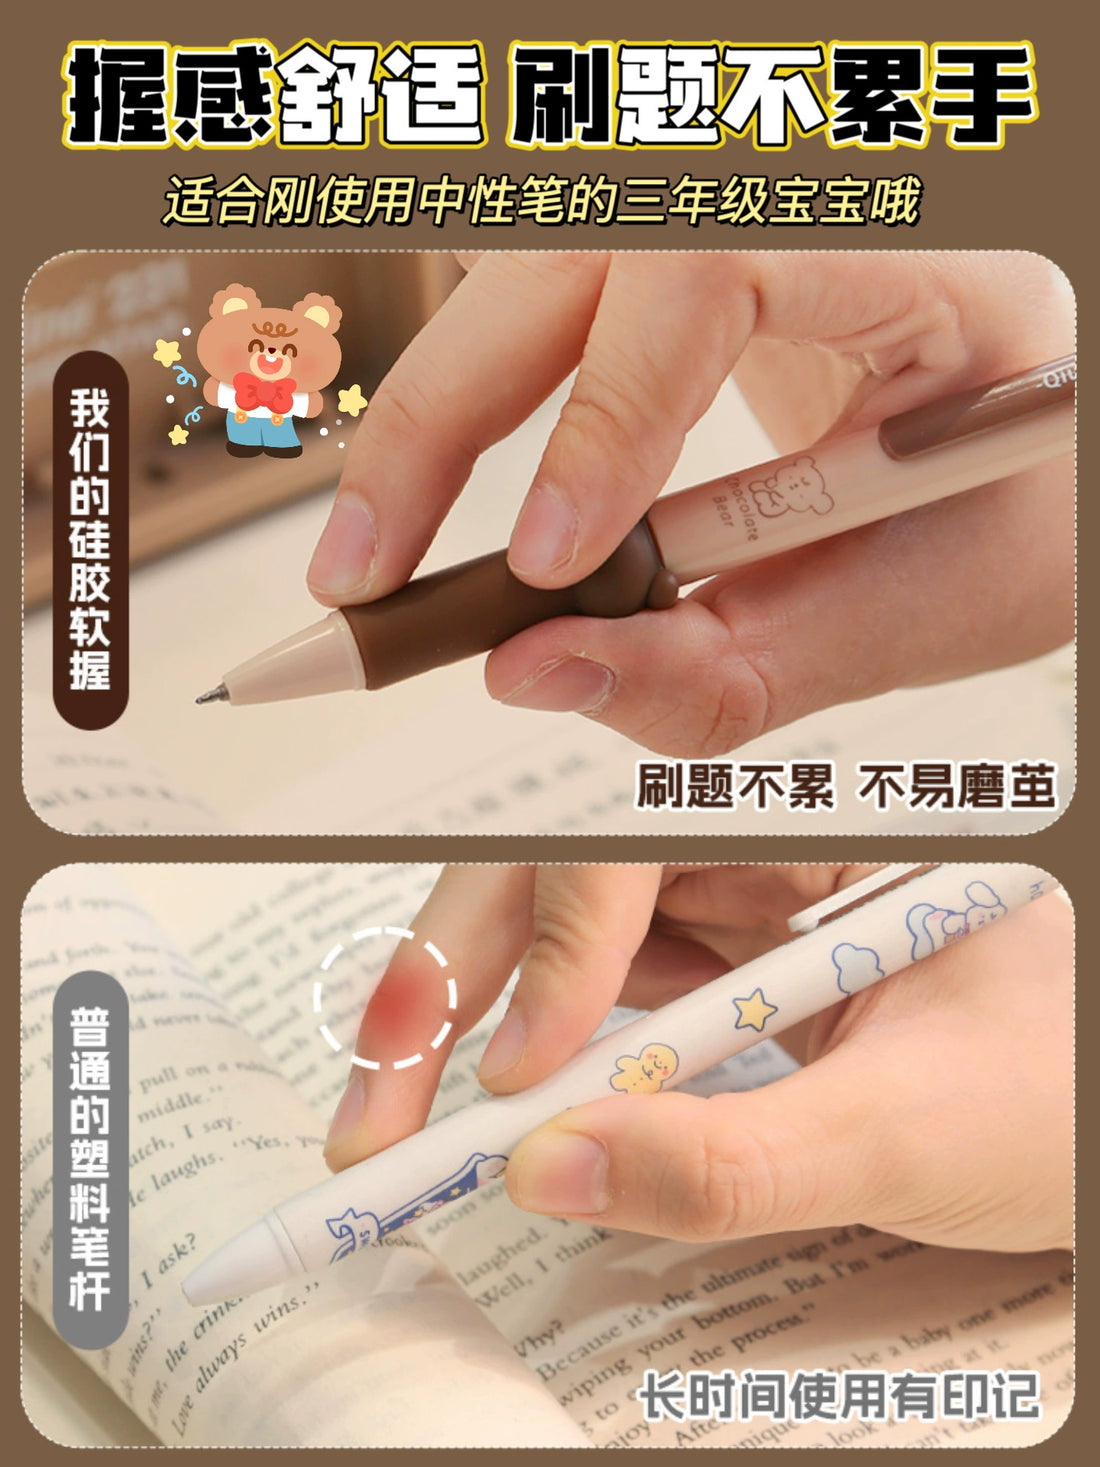 Silicone Soft Grip Bear Hot Scratchable Pen with High Appearance Stationery Press Type Neutral Pen, Student Use Brush Question Black Water Pen